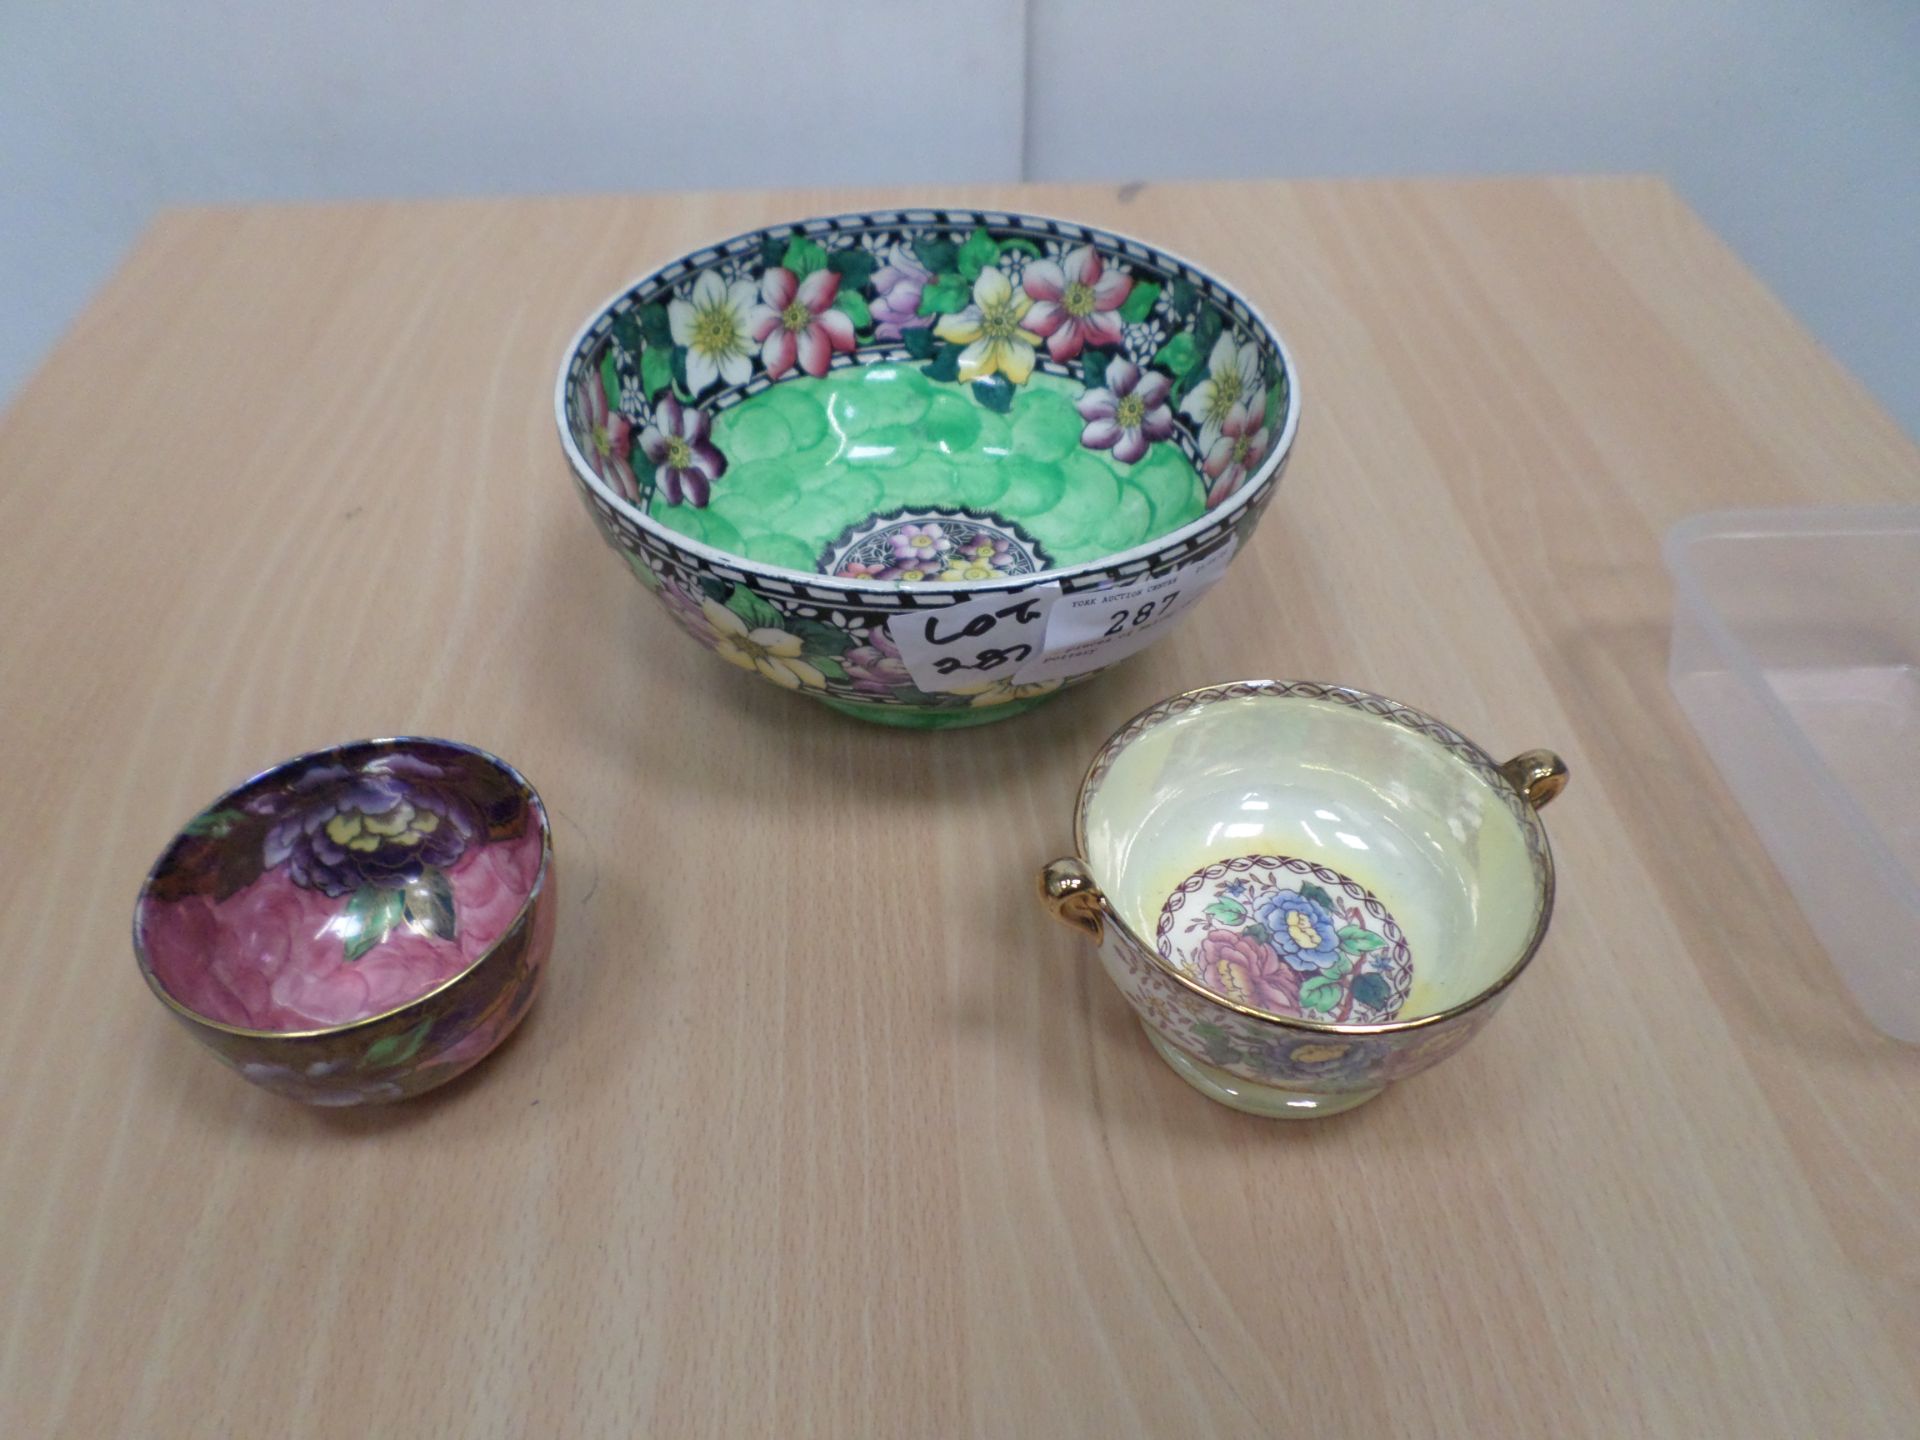 3 pieces of Maling ware pottery